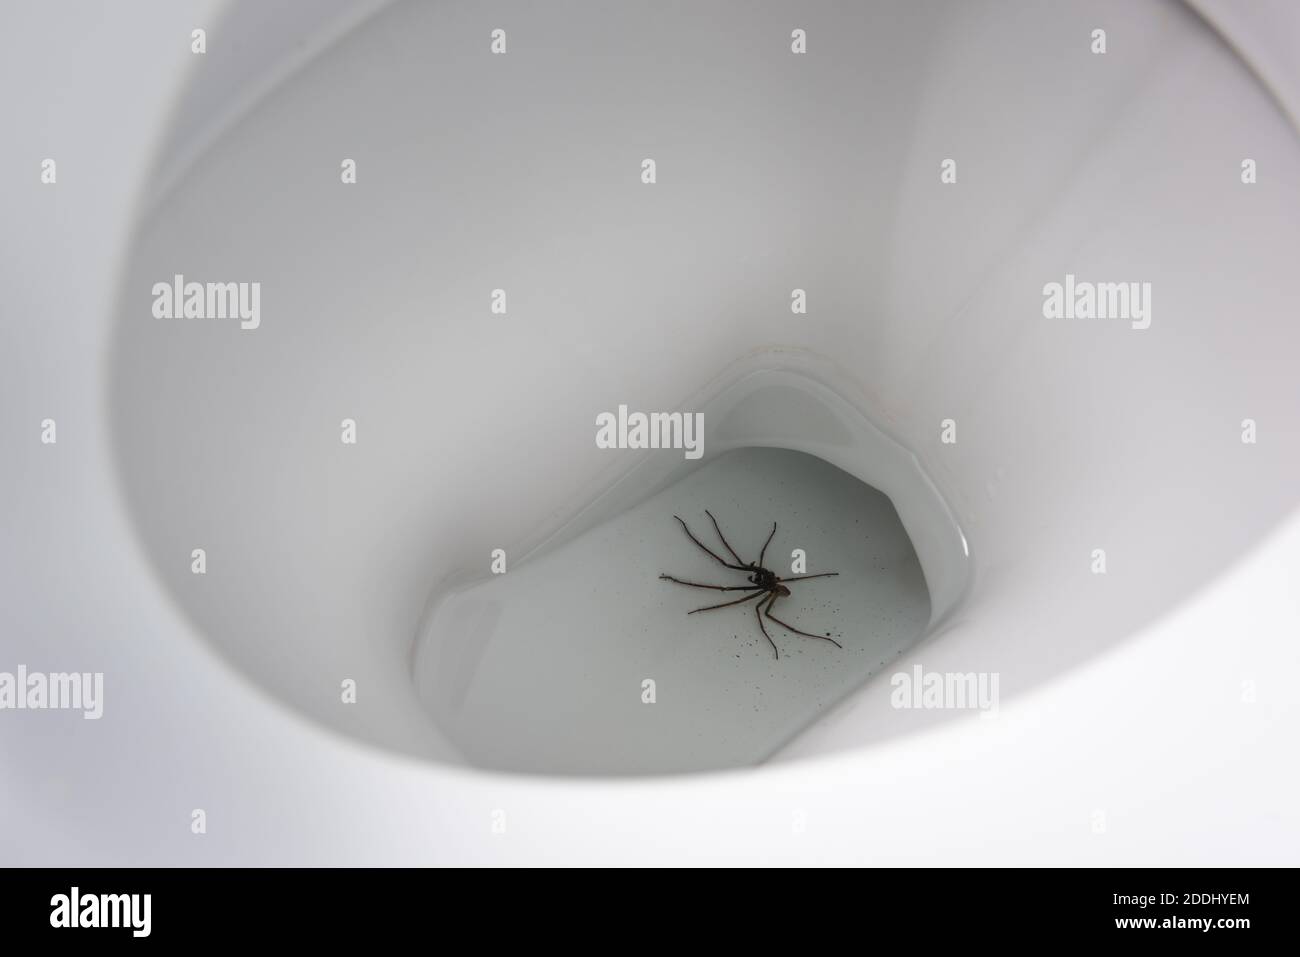 Giant house spider Eratigena atrica fallen in the WC and drowned if have arachnophobia very scary shock seeing this bad shock Stock Photo